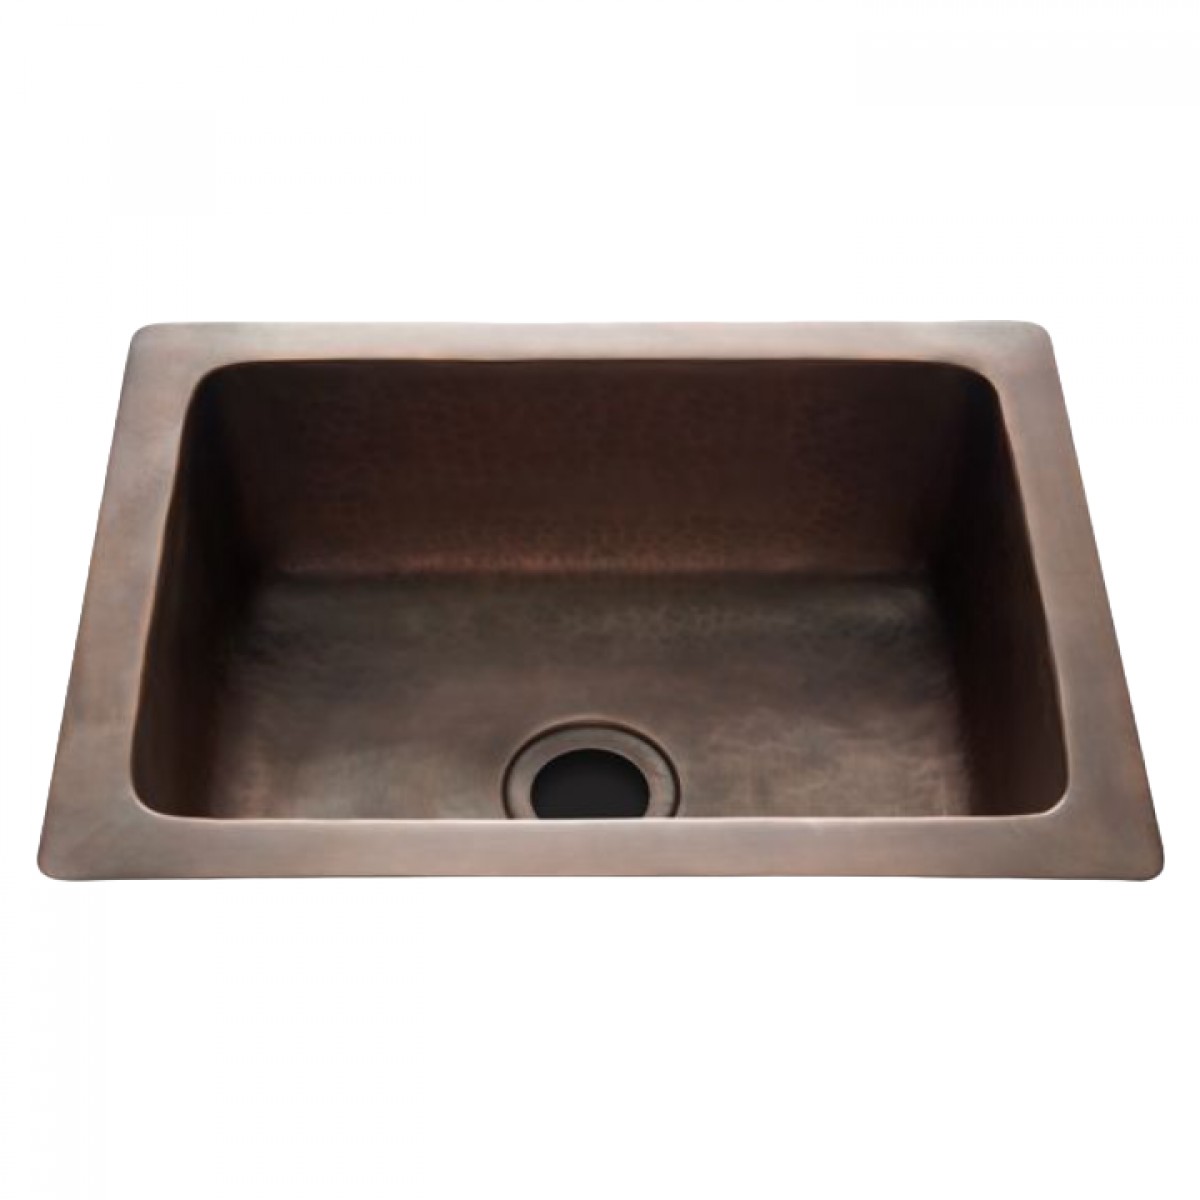 Normandy 14 15/16" x 11 7/16" x 5 11/16" Hammered Copper Bar Sink with Center Drain